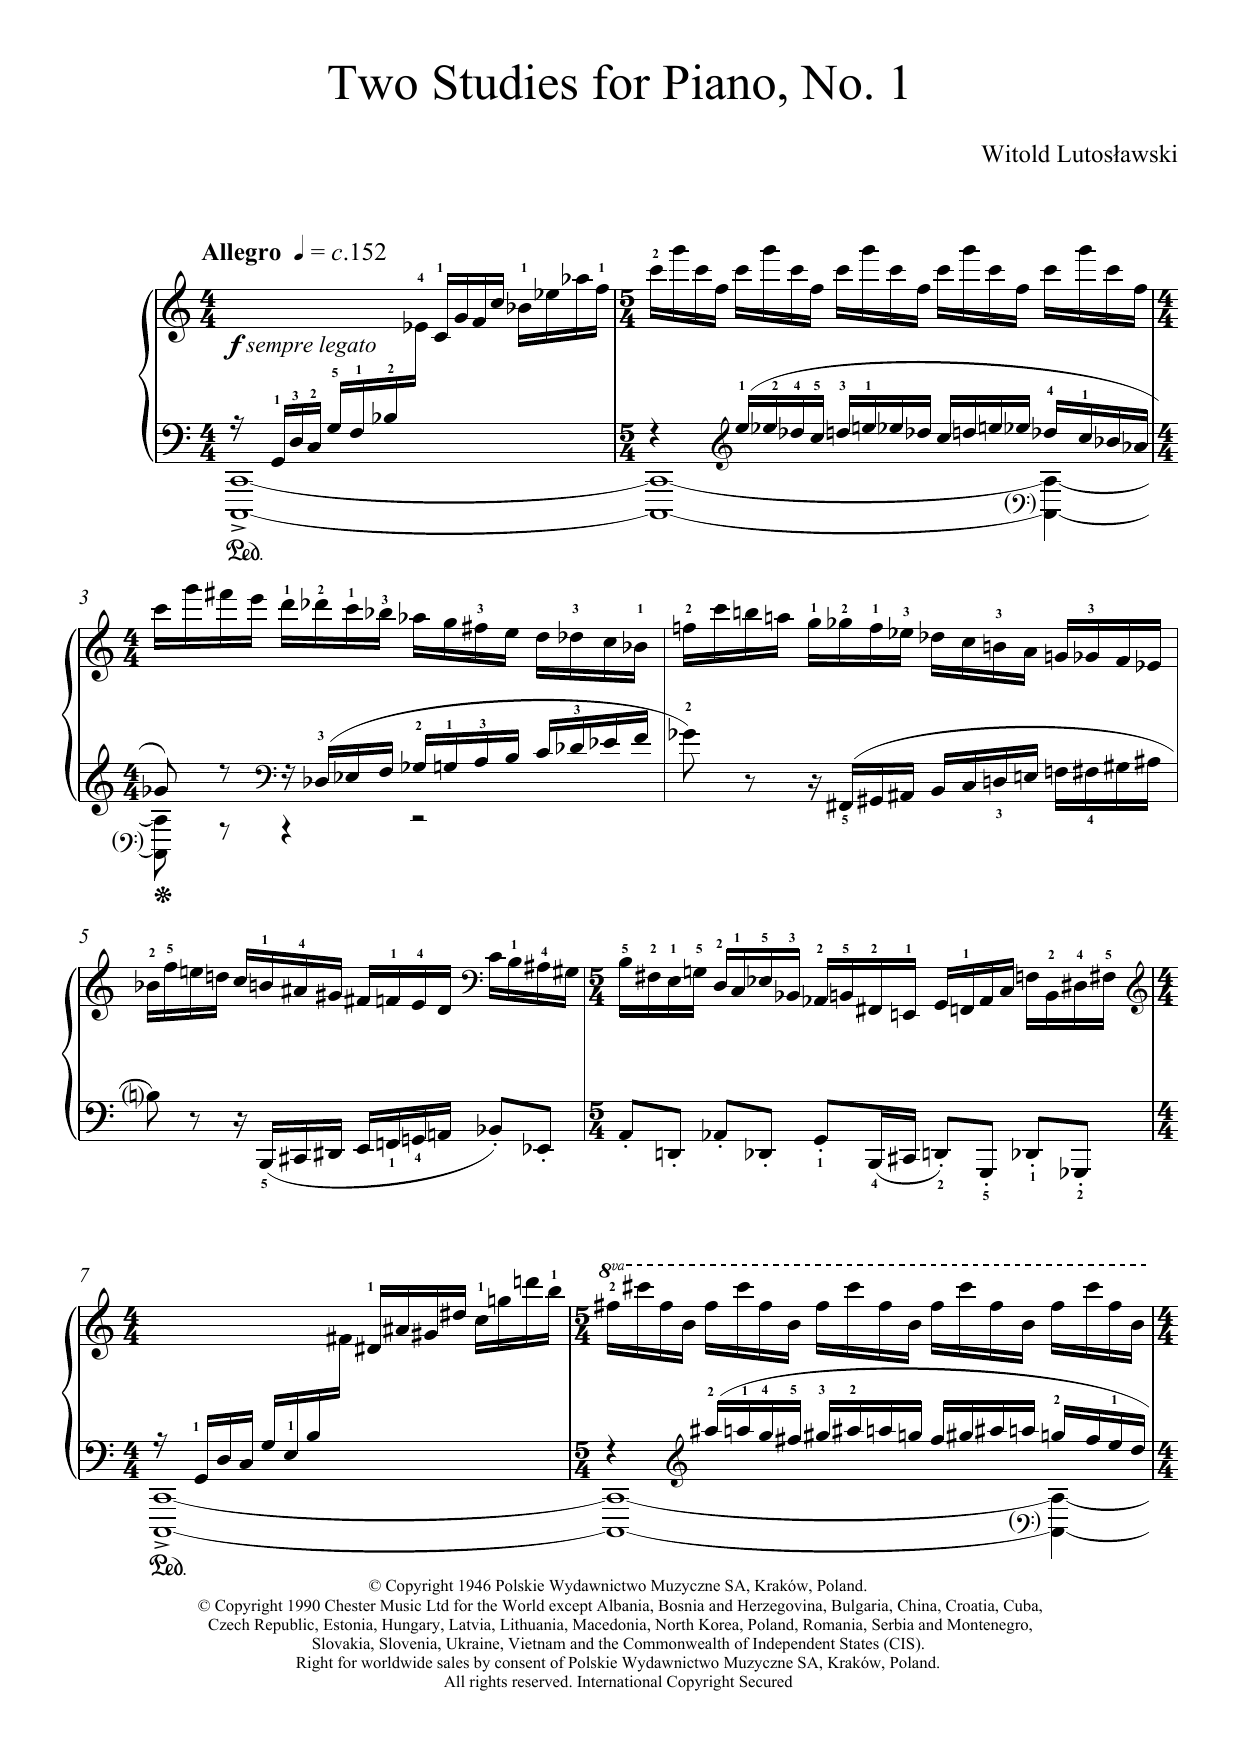 Download Witold Lutoslawski Two Studies For Piano, 1. Allegro Sheet Music